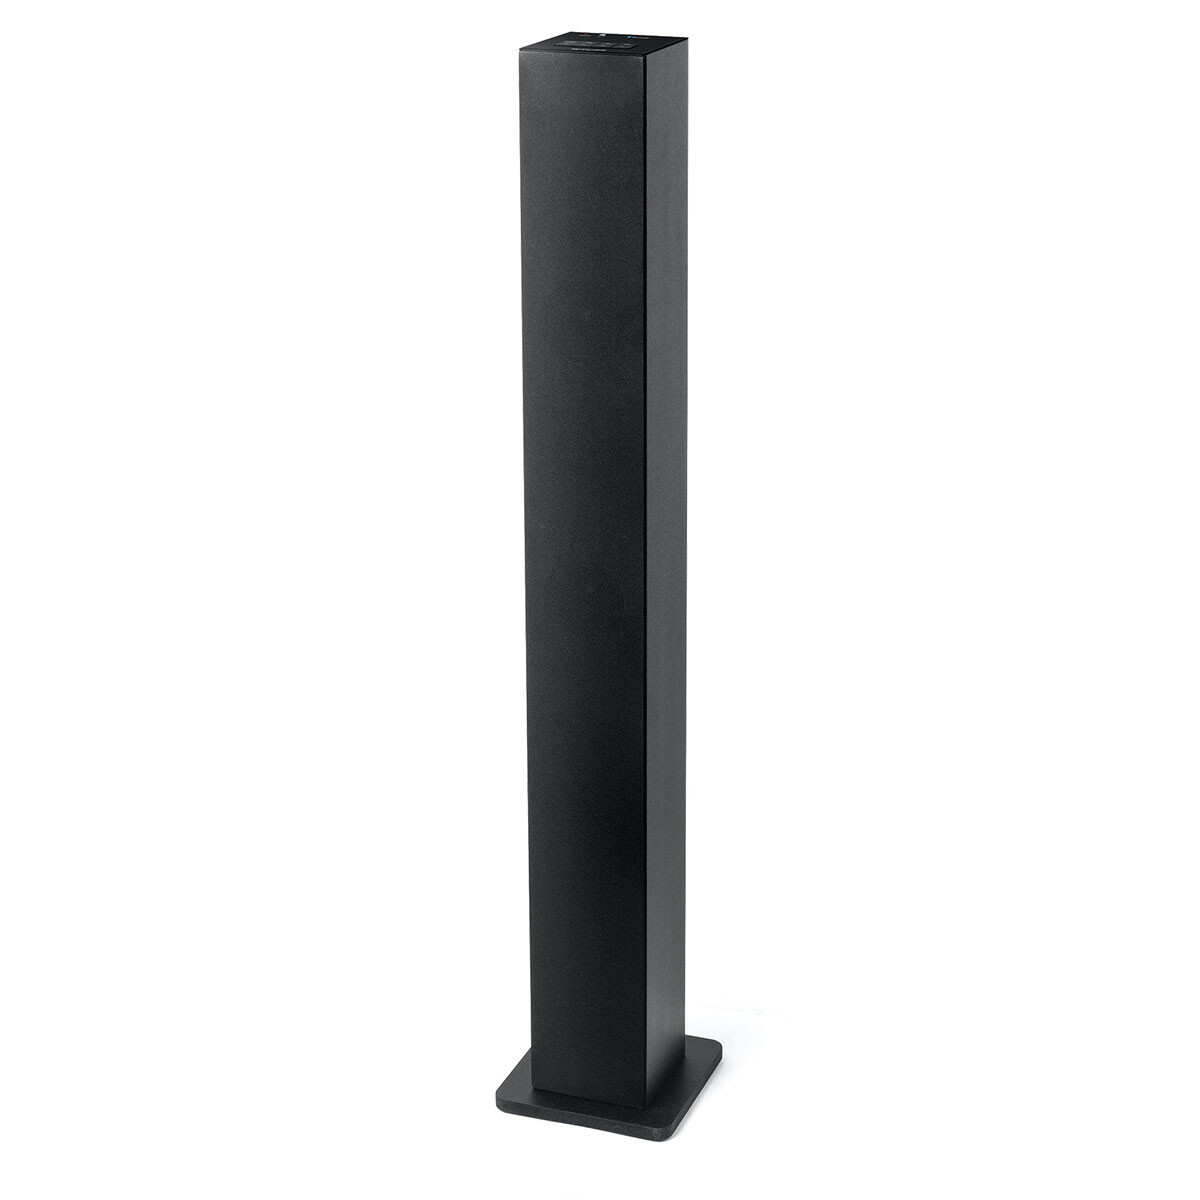 Reproductor Bt Muse M1050bt Formato Torre 